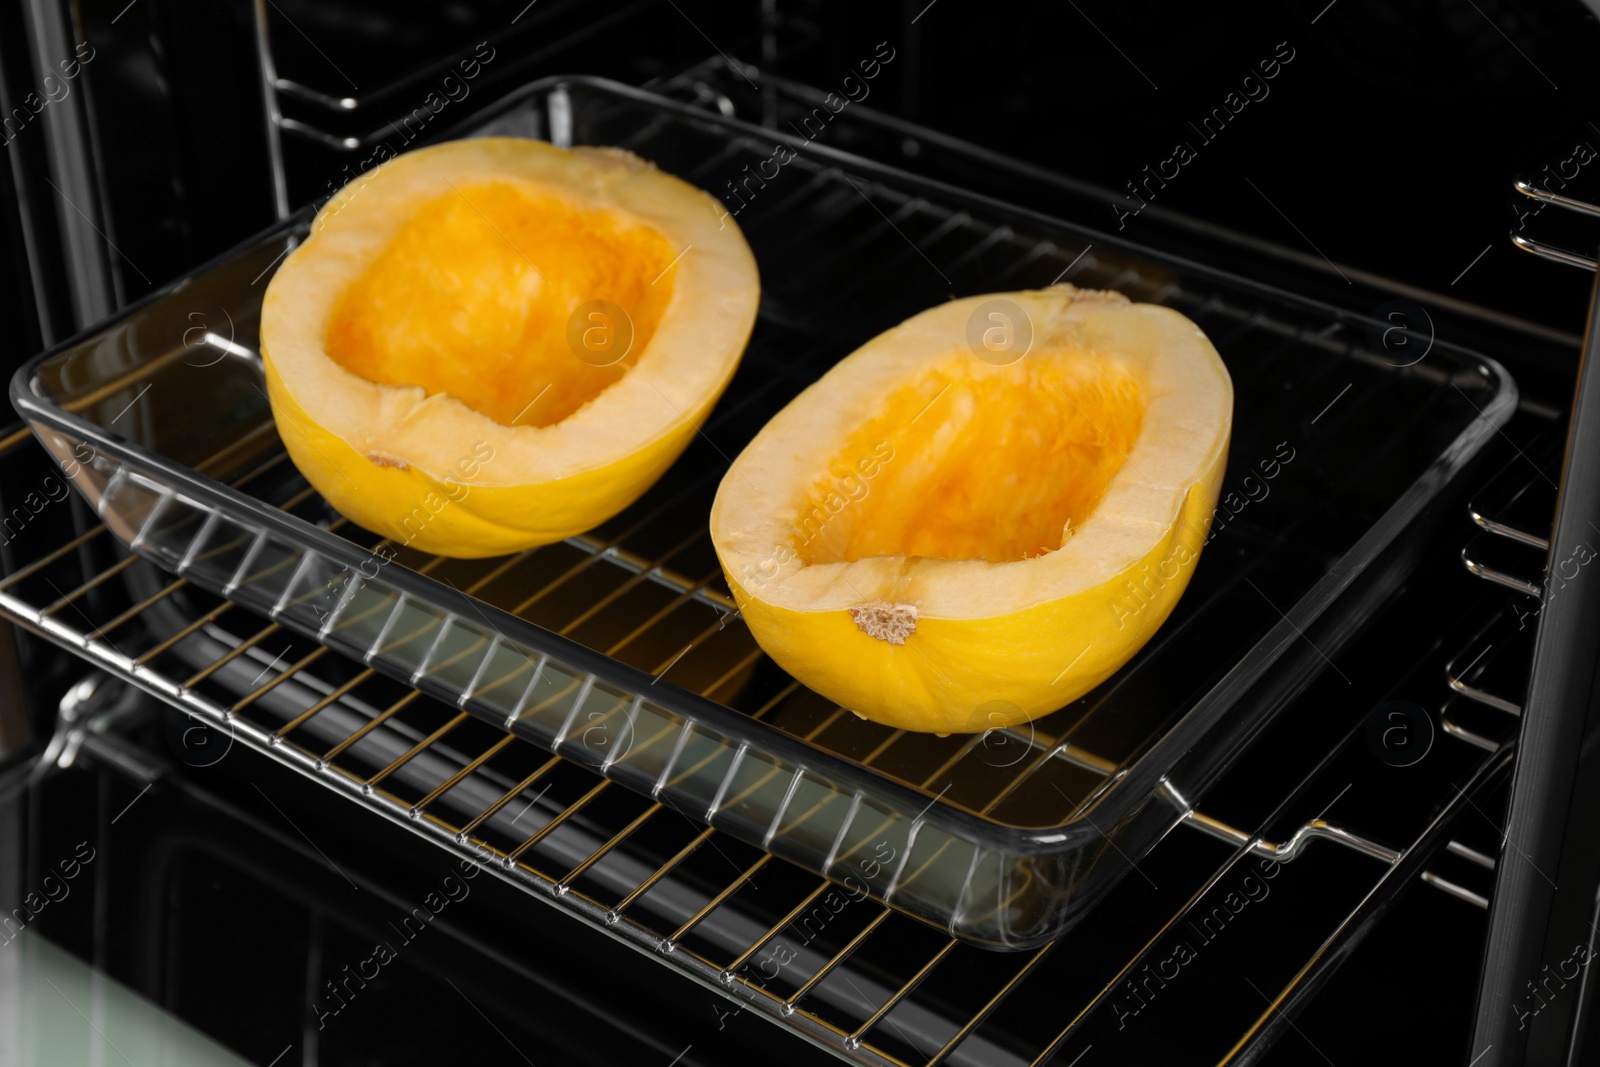 Photo of Baking dish with halves of fresh spaghetti squash in oven